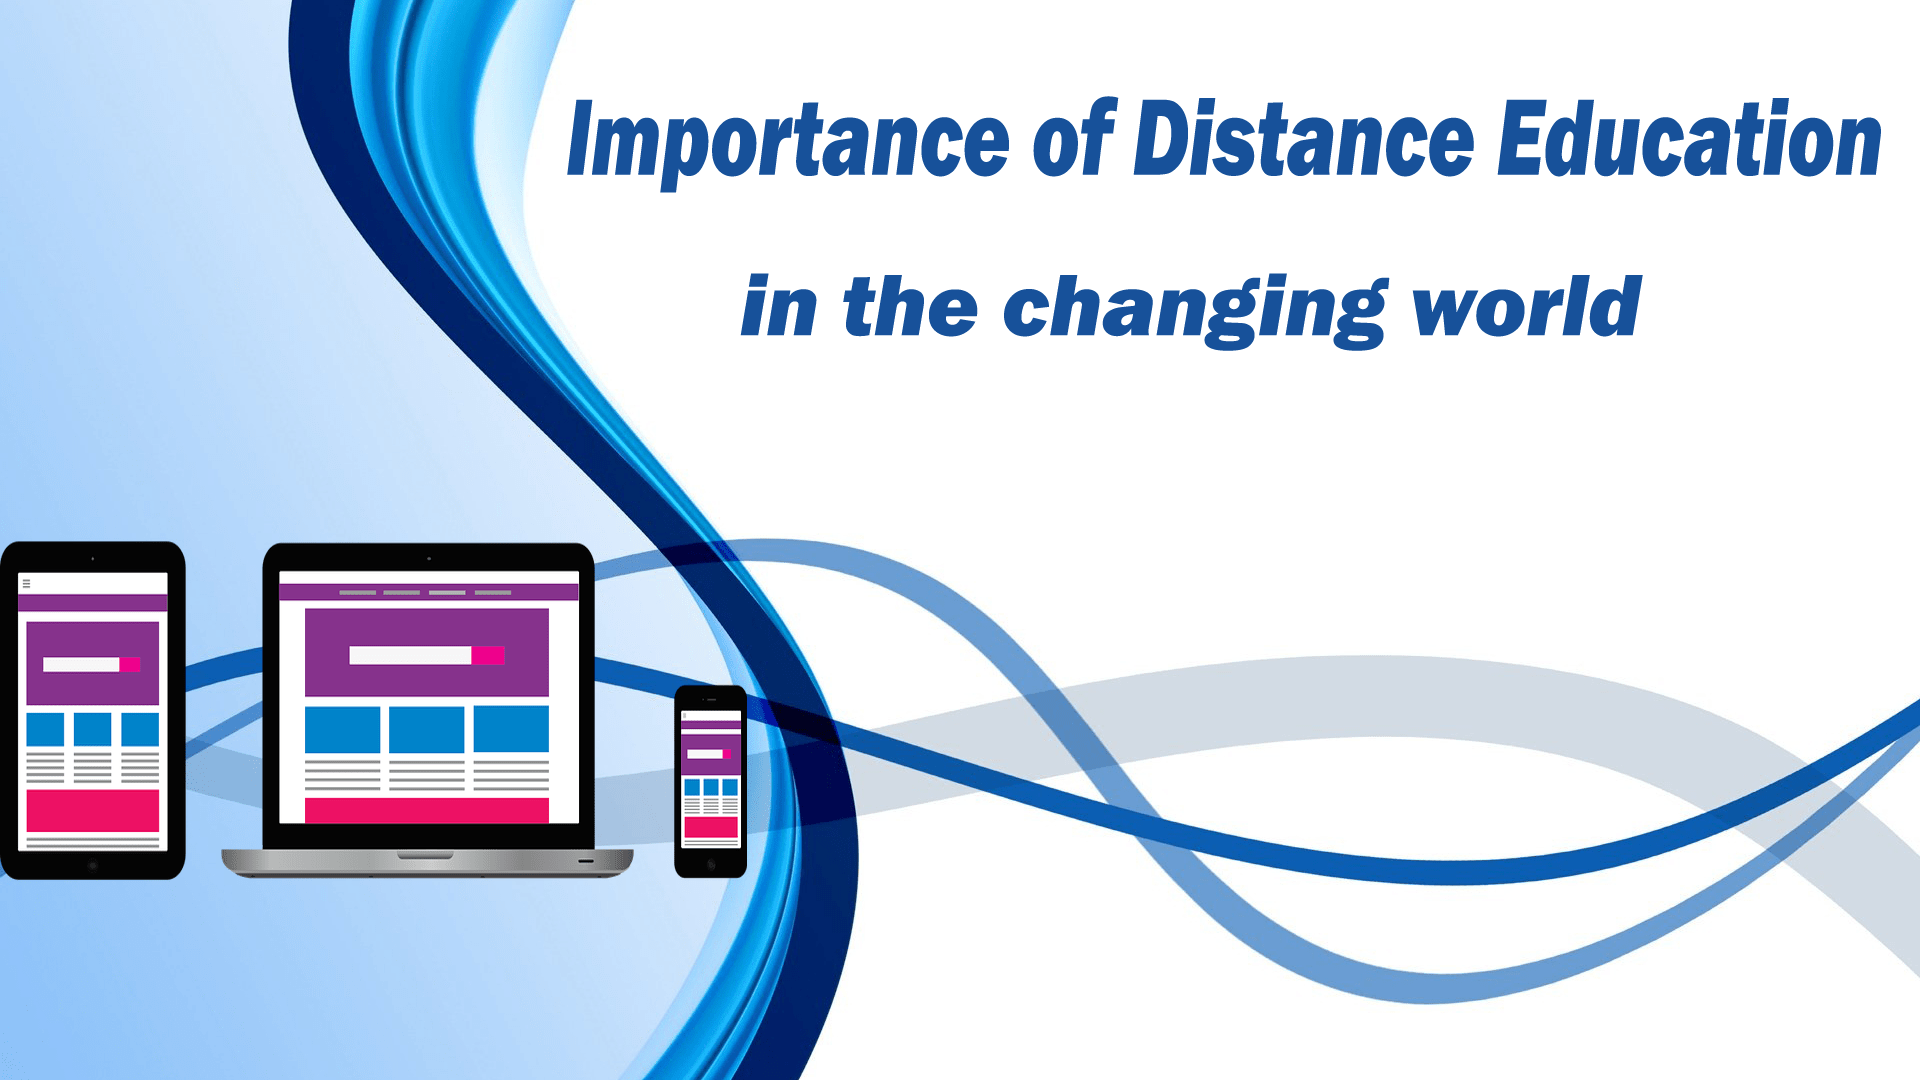 research about distance education